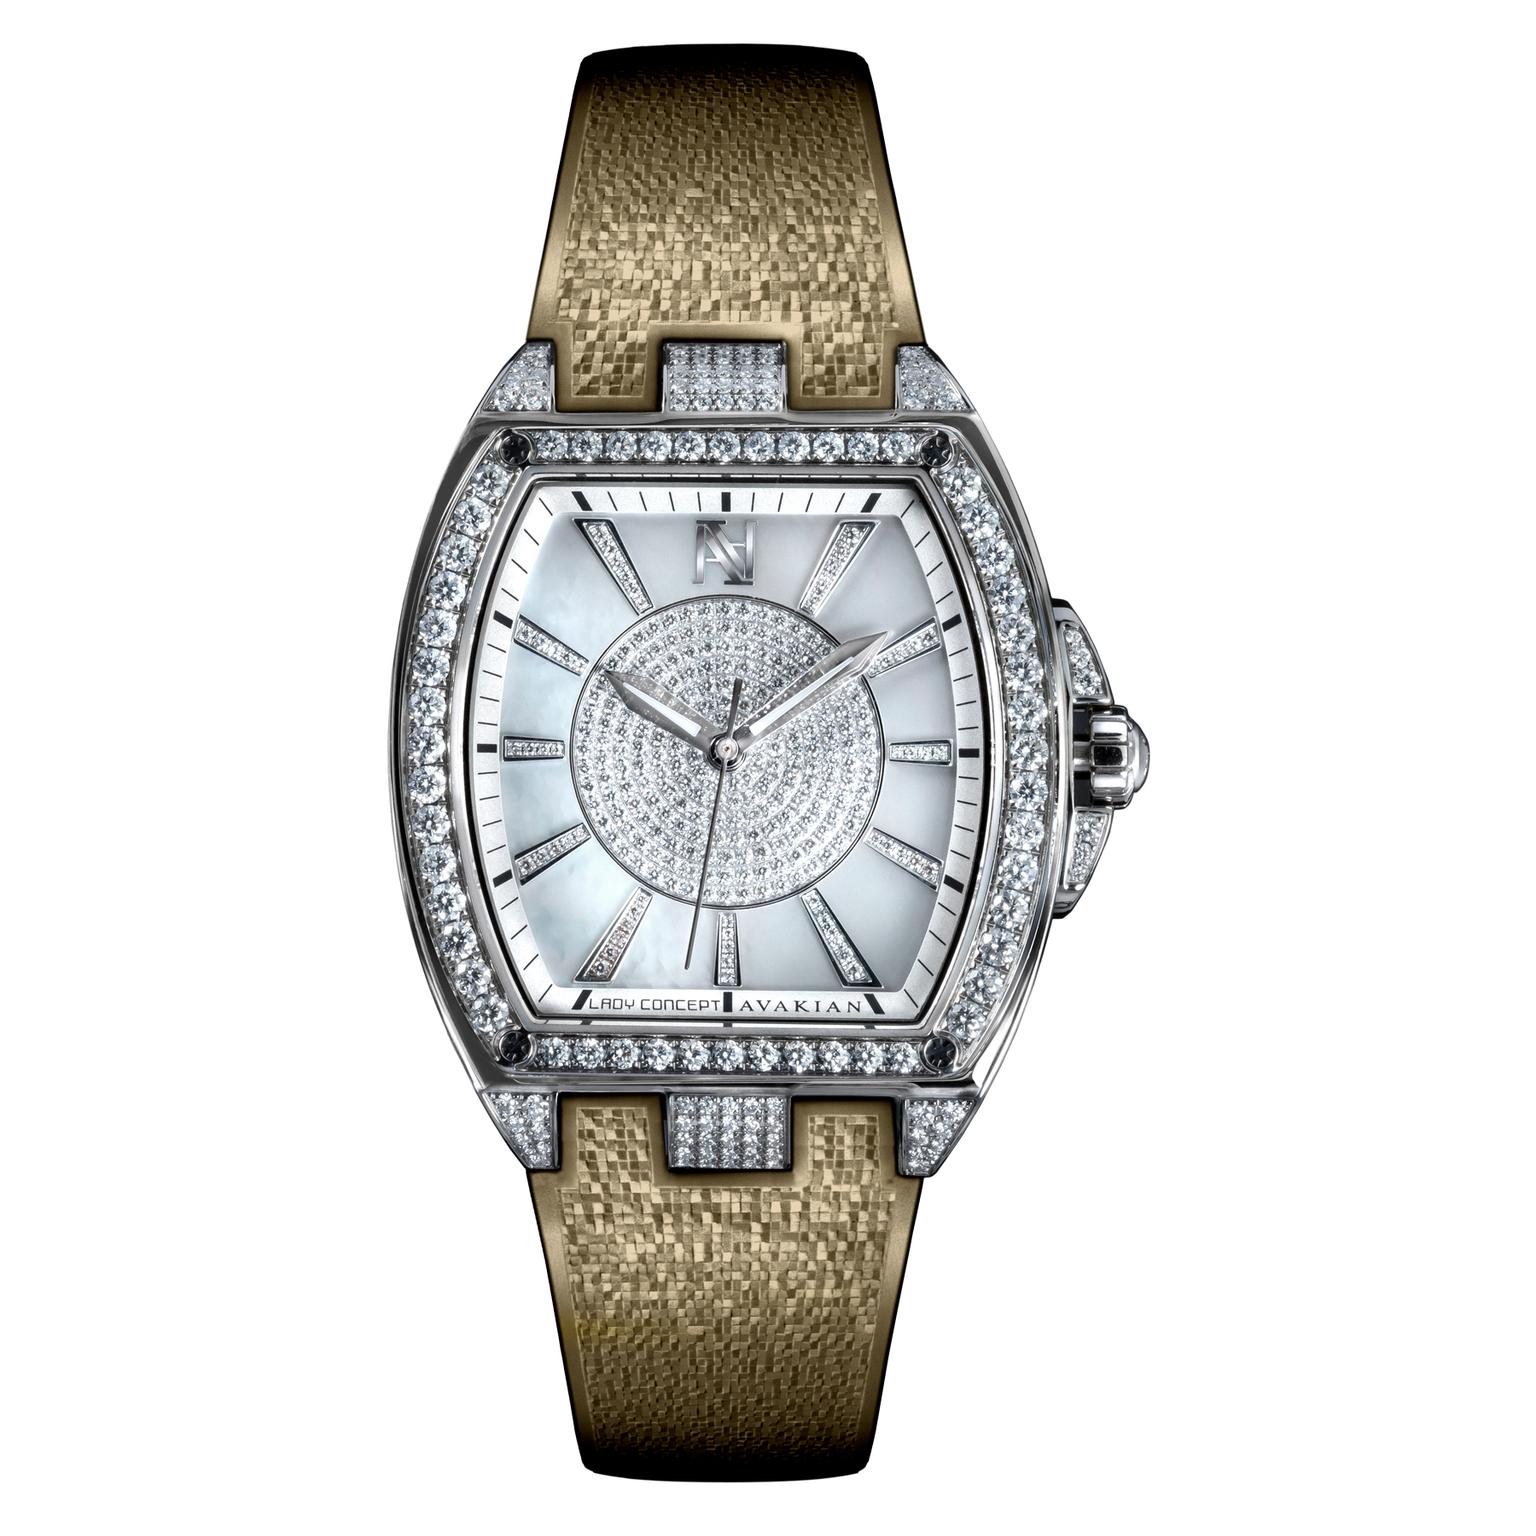 Avakian Lady Concept Taupe watch